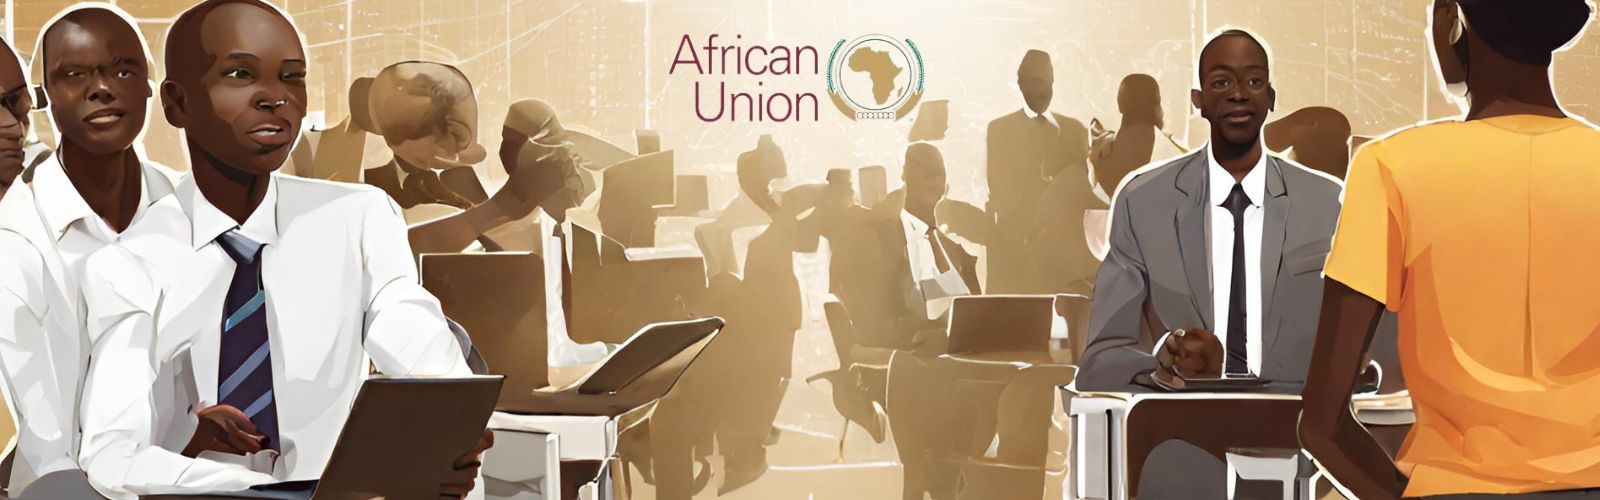 African ministers rally more action to bridge the digital divide and inequalities.